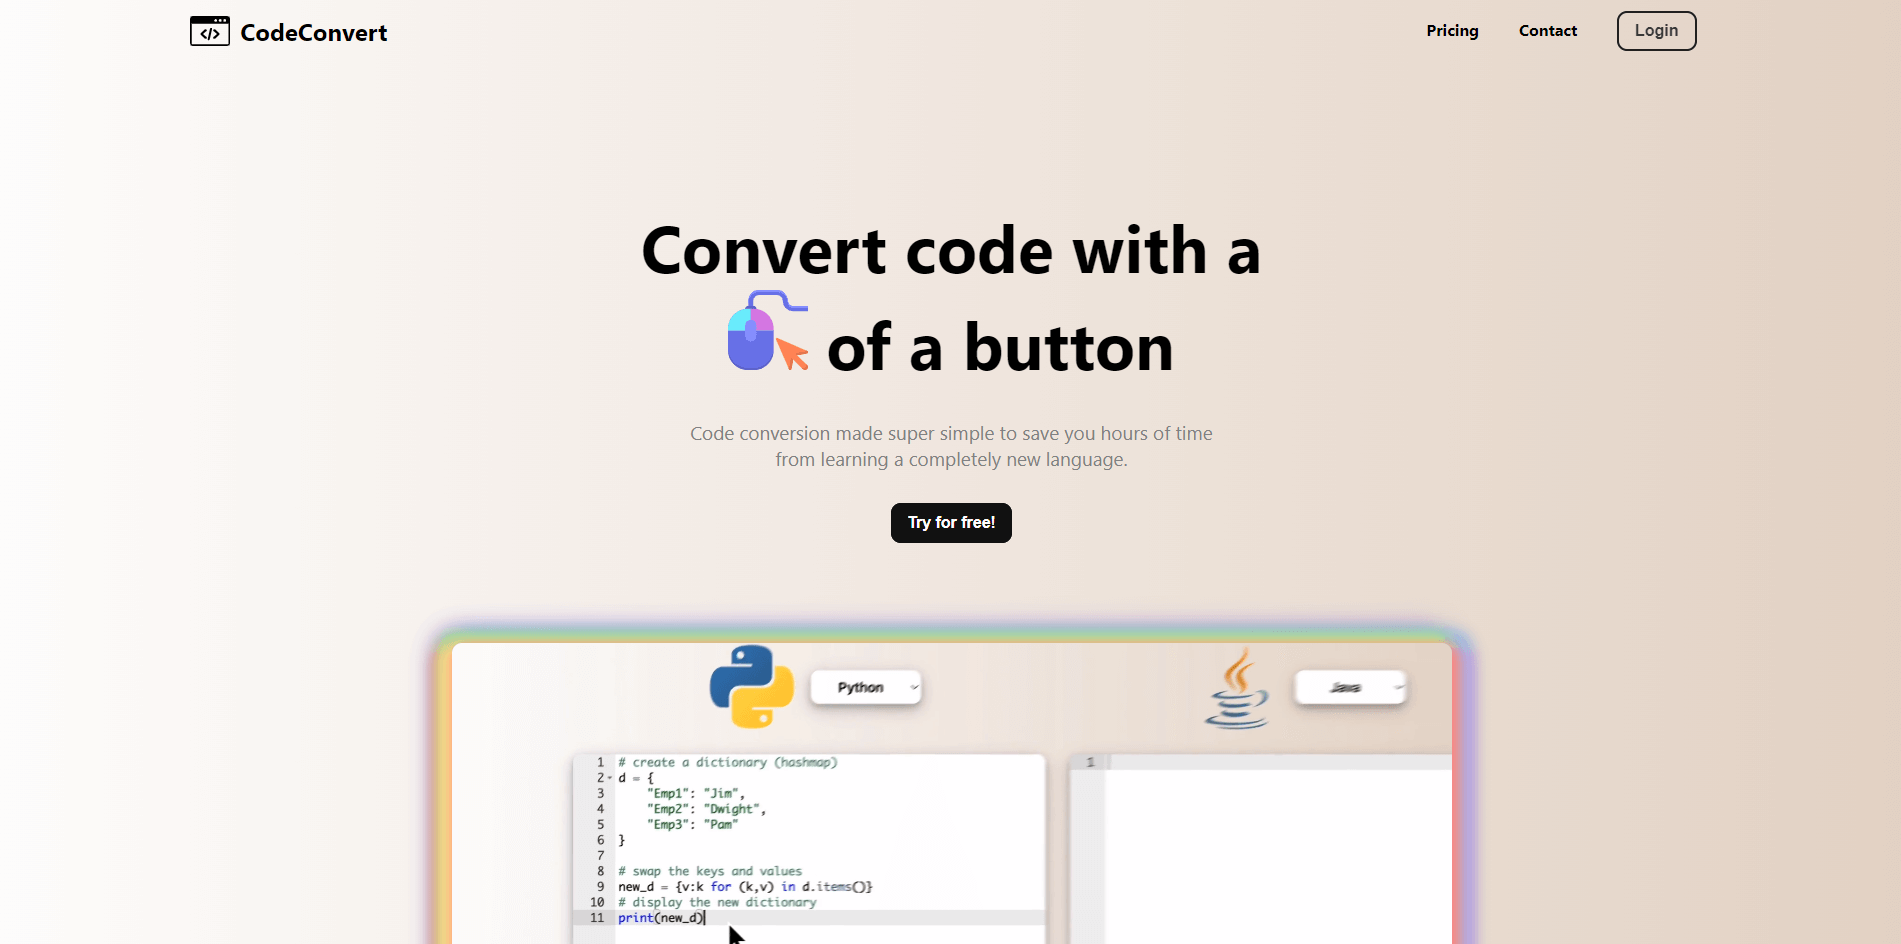 codeconvert.ai | Code conversion made super simple to save you hours of time from learning a completely new language.